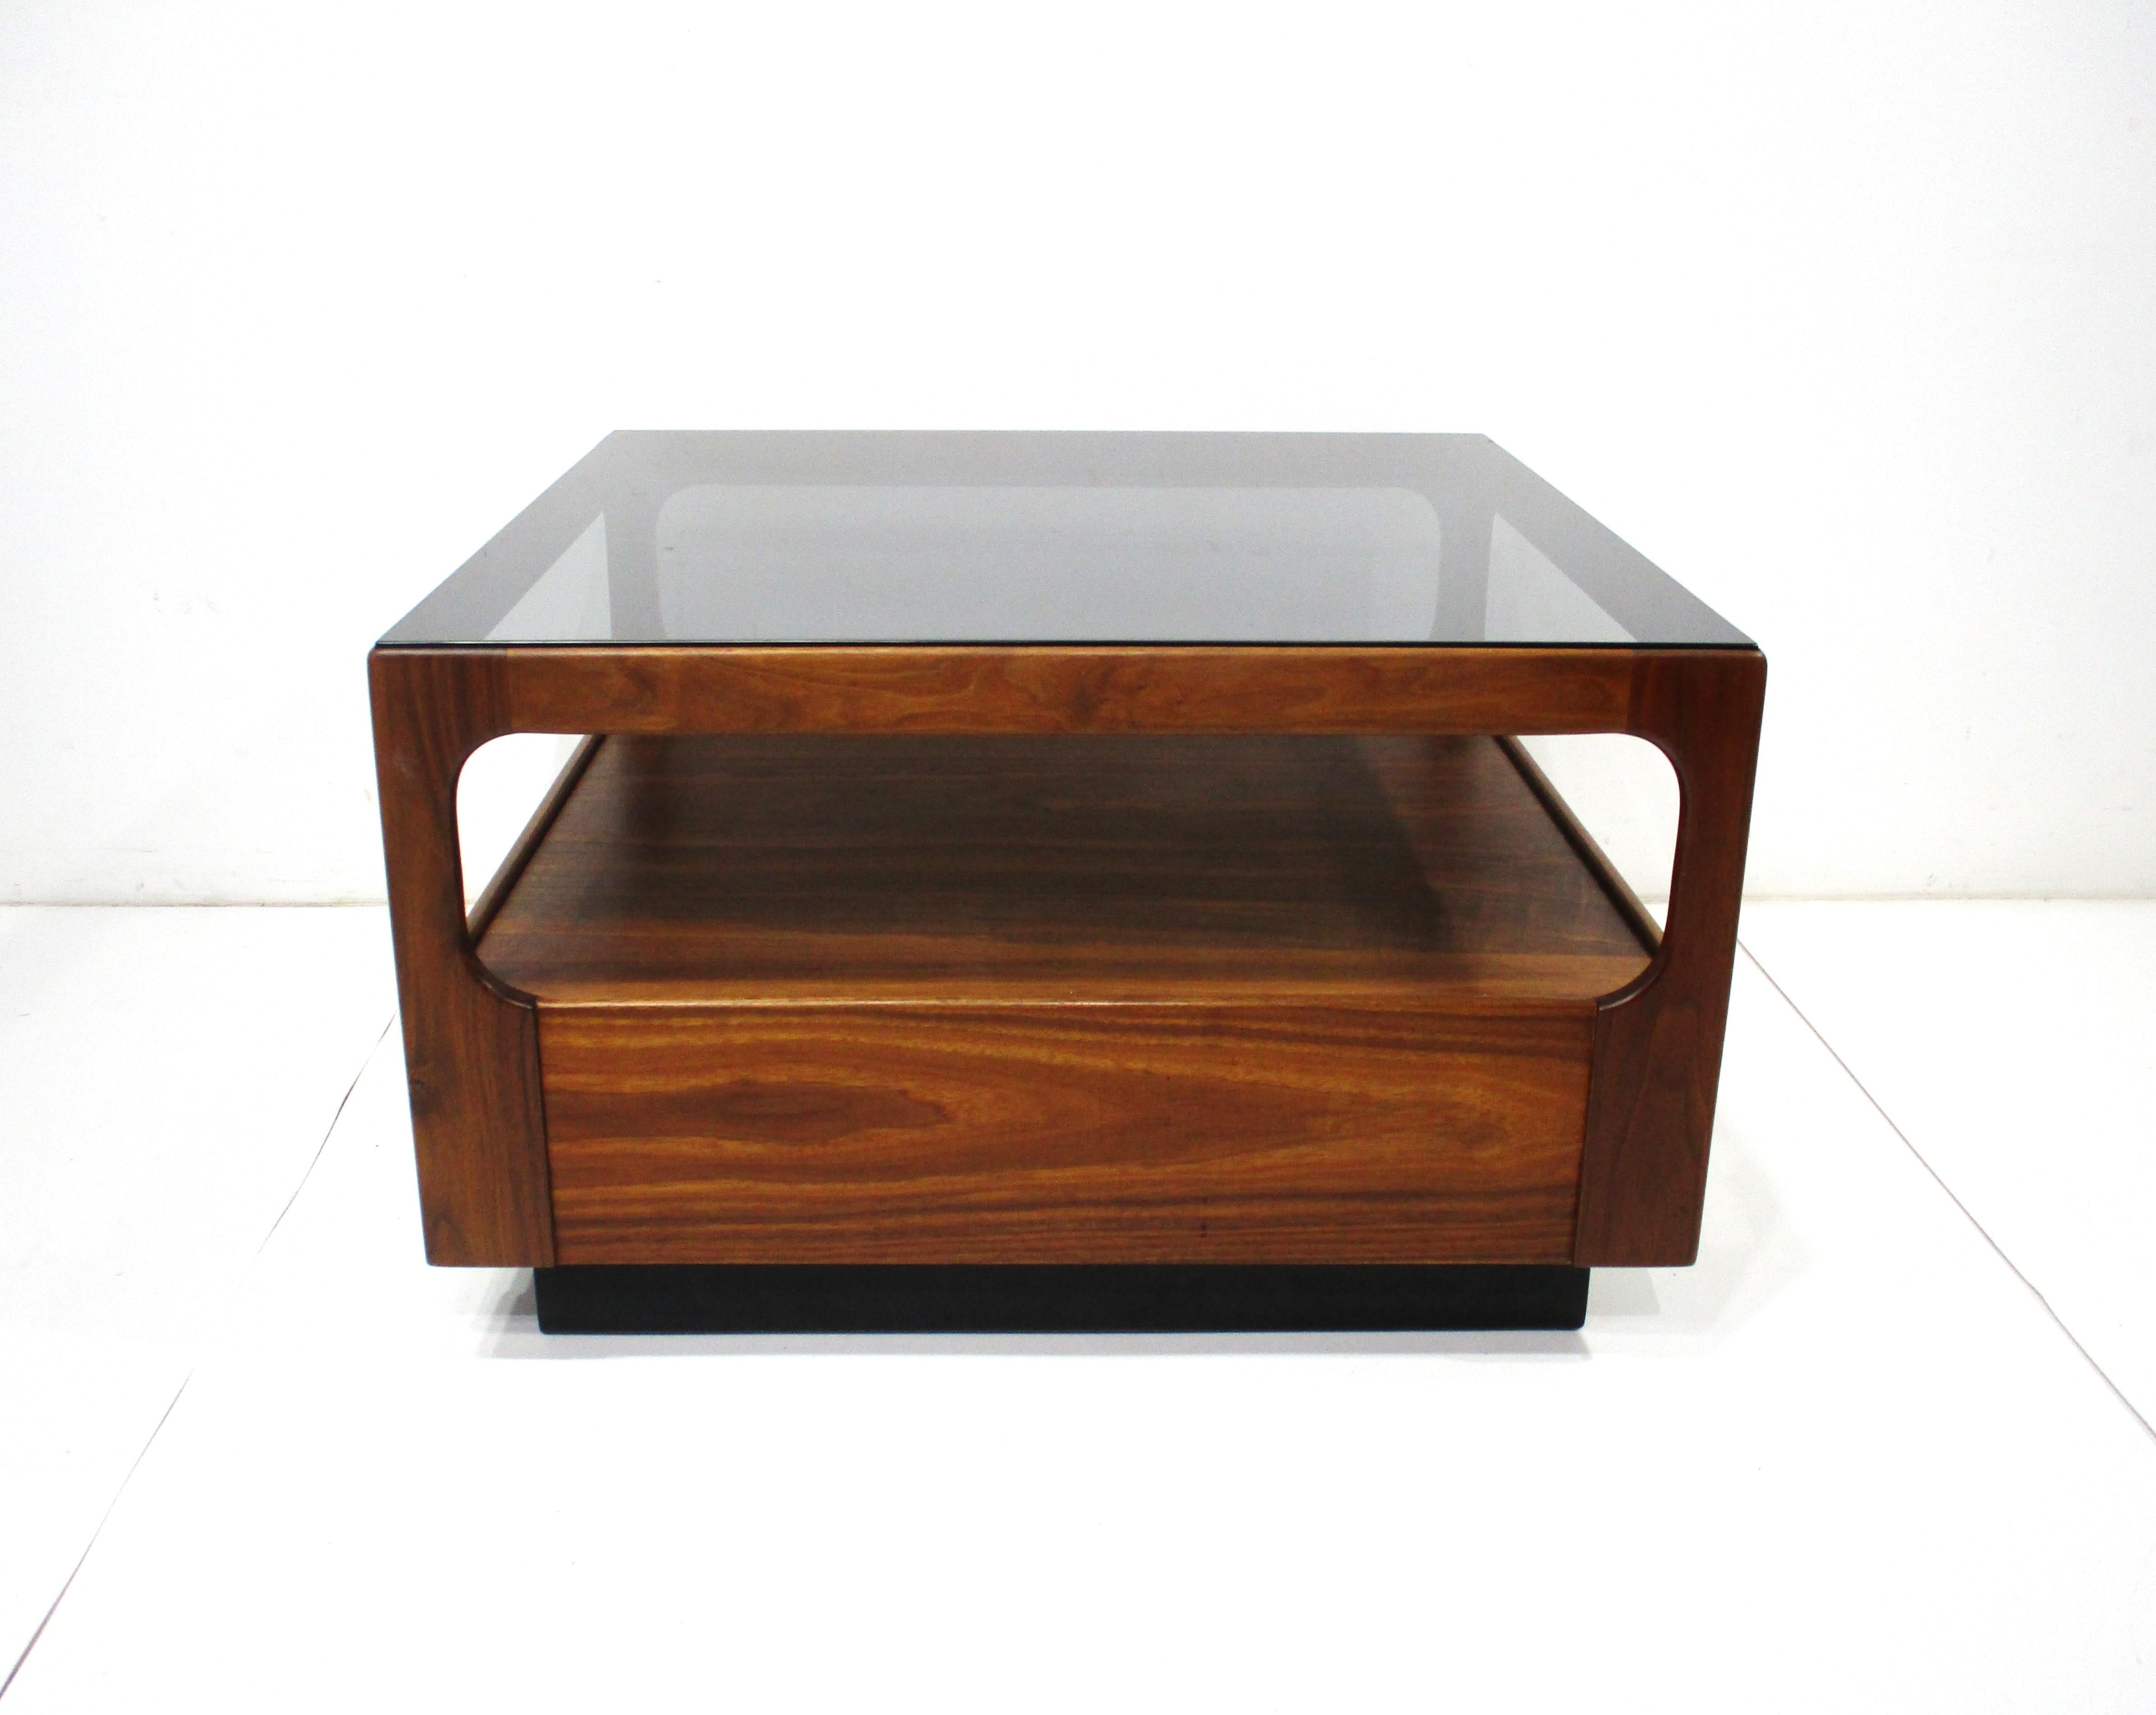 A medium dark walnut framed square coffee table with smoked glass inset top . The table has a lower shelving area for storage which makes it very useful for your living space . Crafted by Otmar in the manner of Danish Modern design with attention